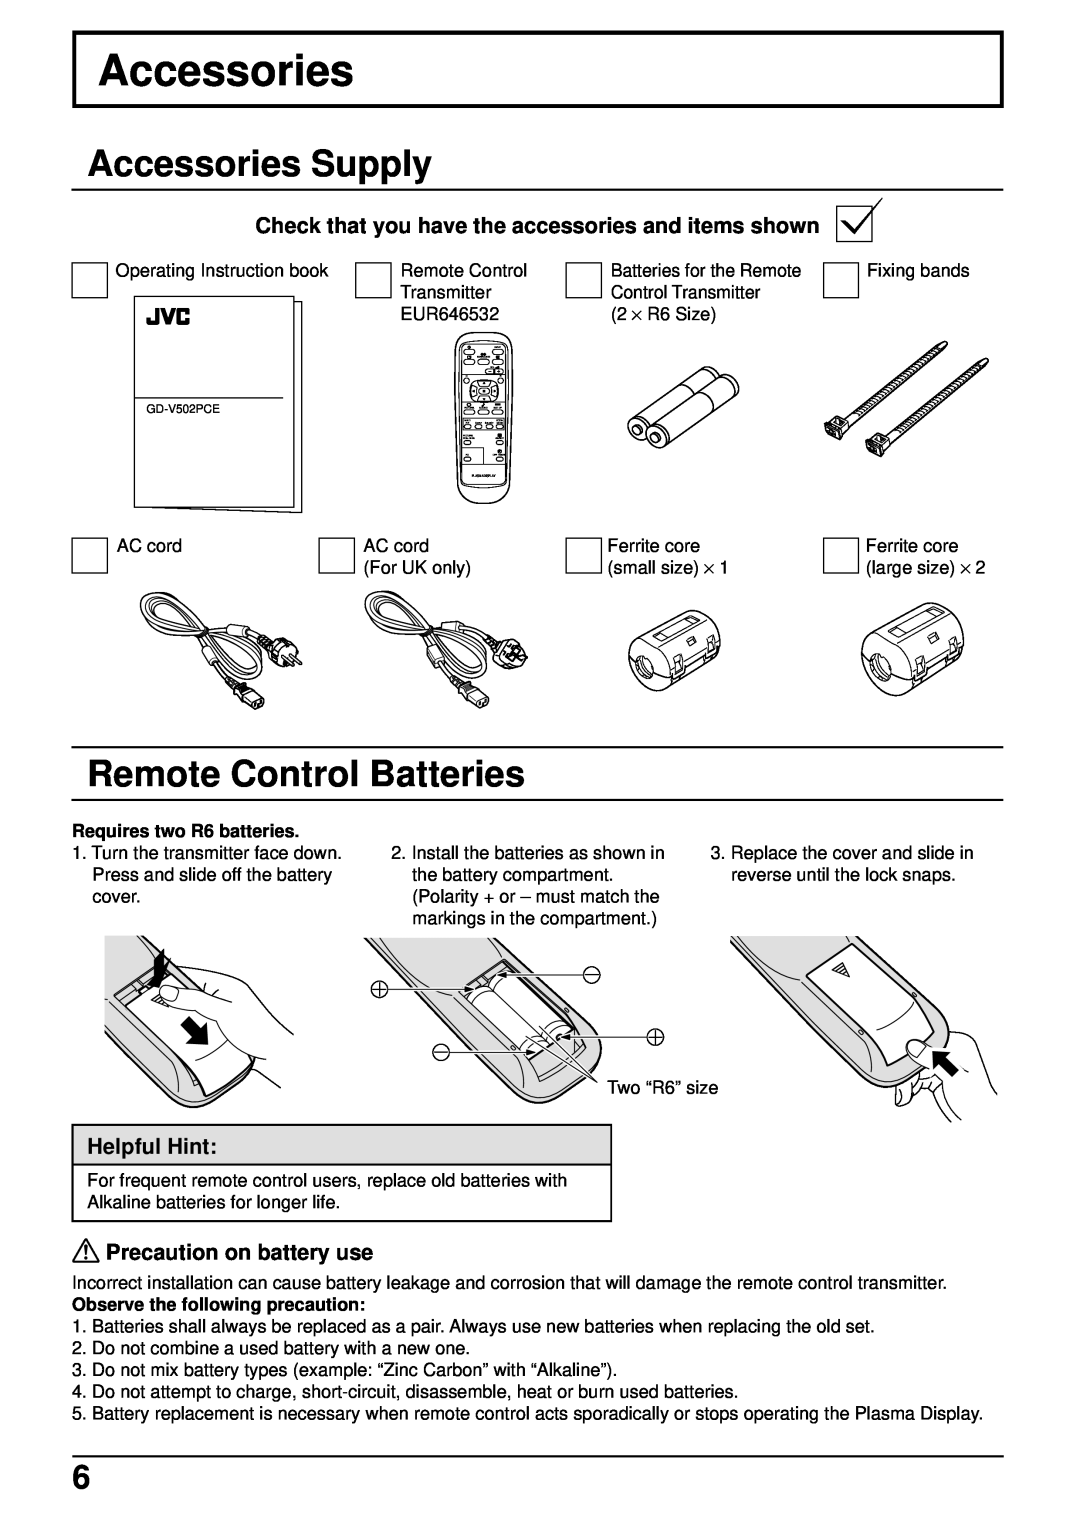 JVC GD-V502PCE manual Accessories Supply, Remote Control Batteries, Check that you have the accessories and items shown 